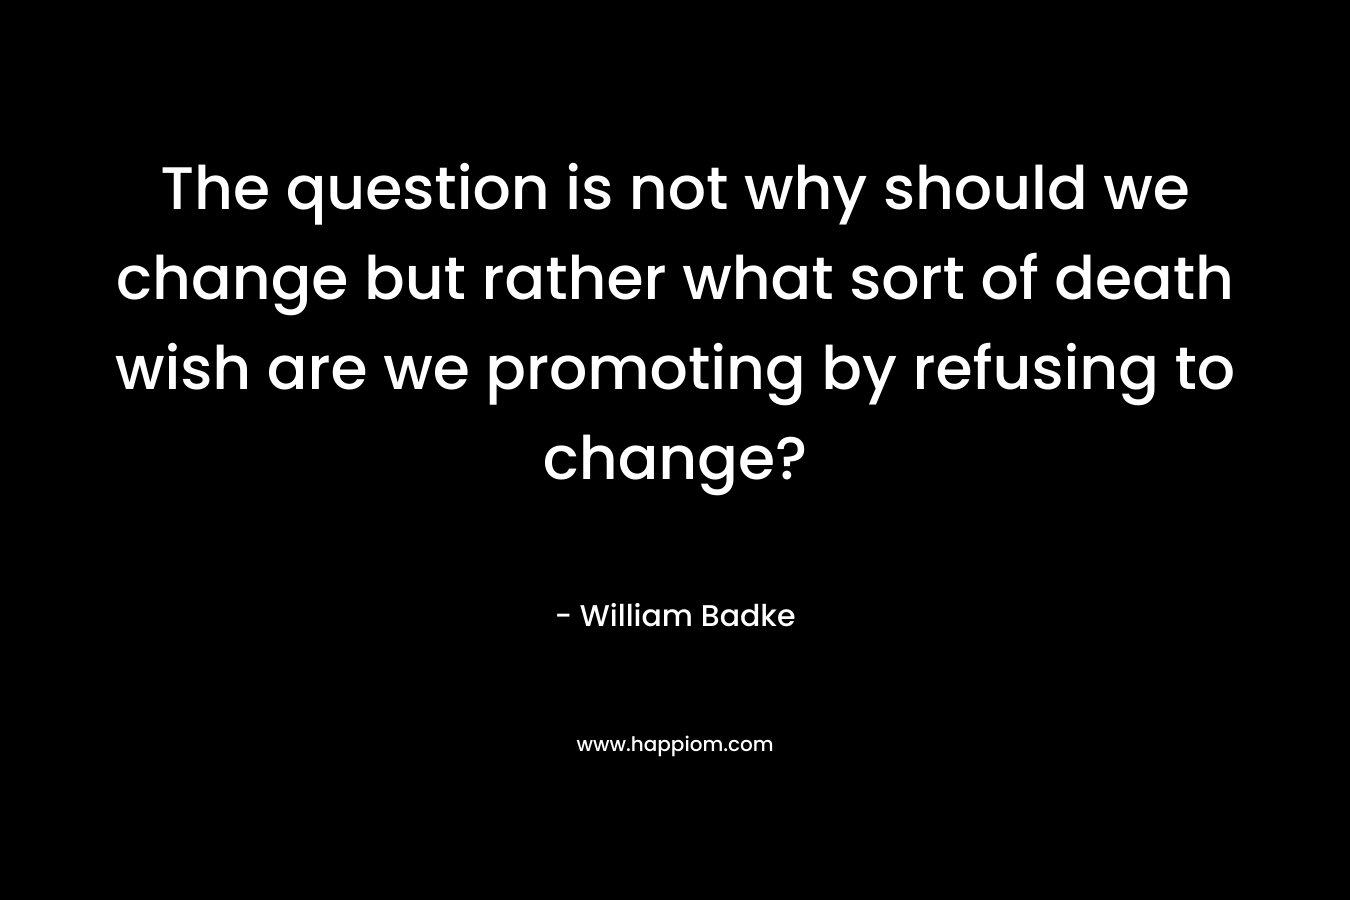 The question is not why should we change but rather what sort of death wish are we promoting by refusing to change? – William Badke